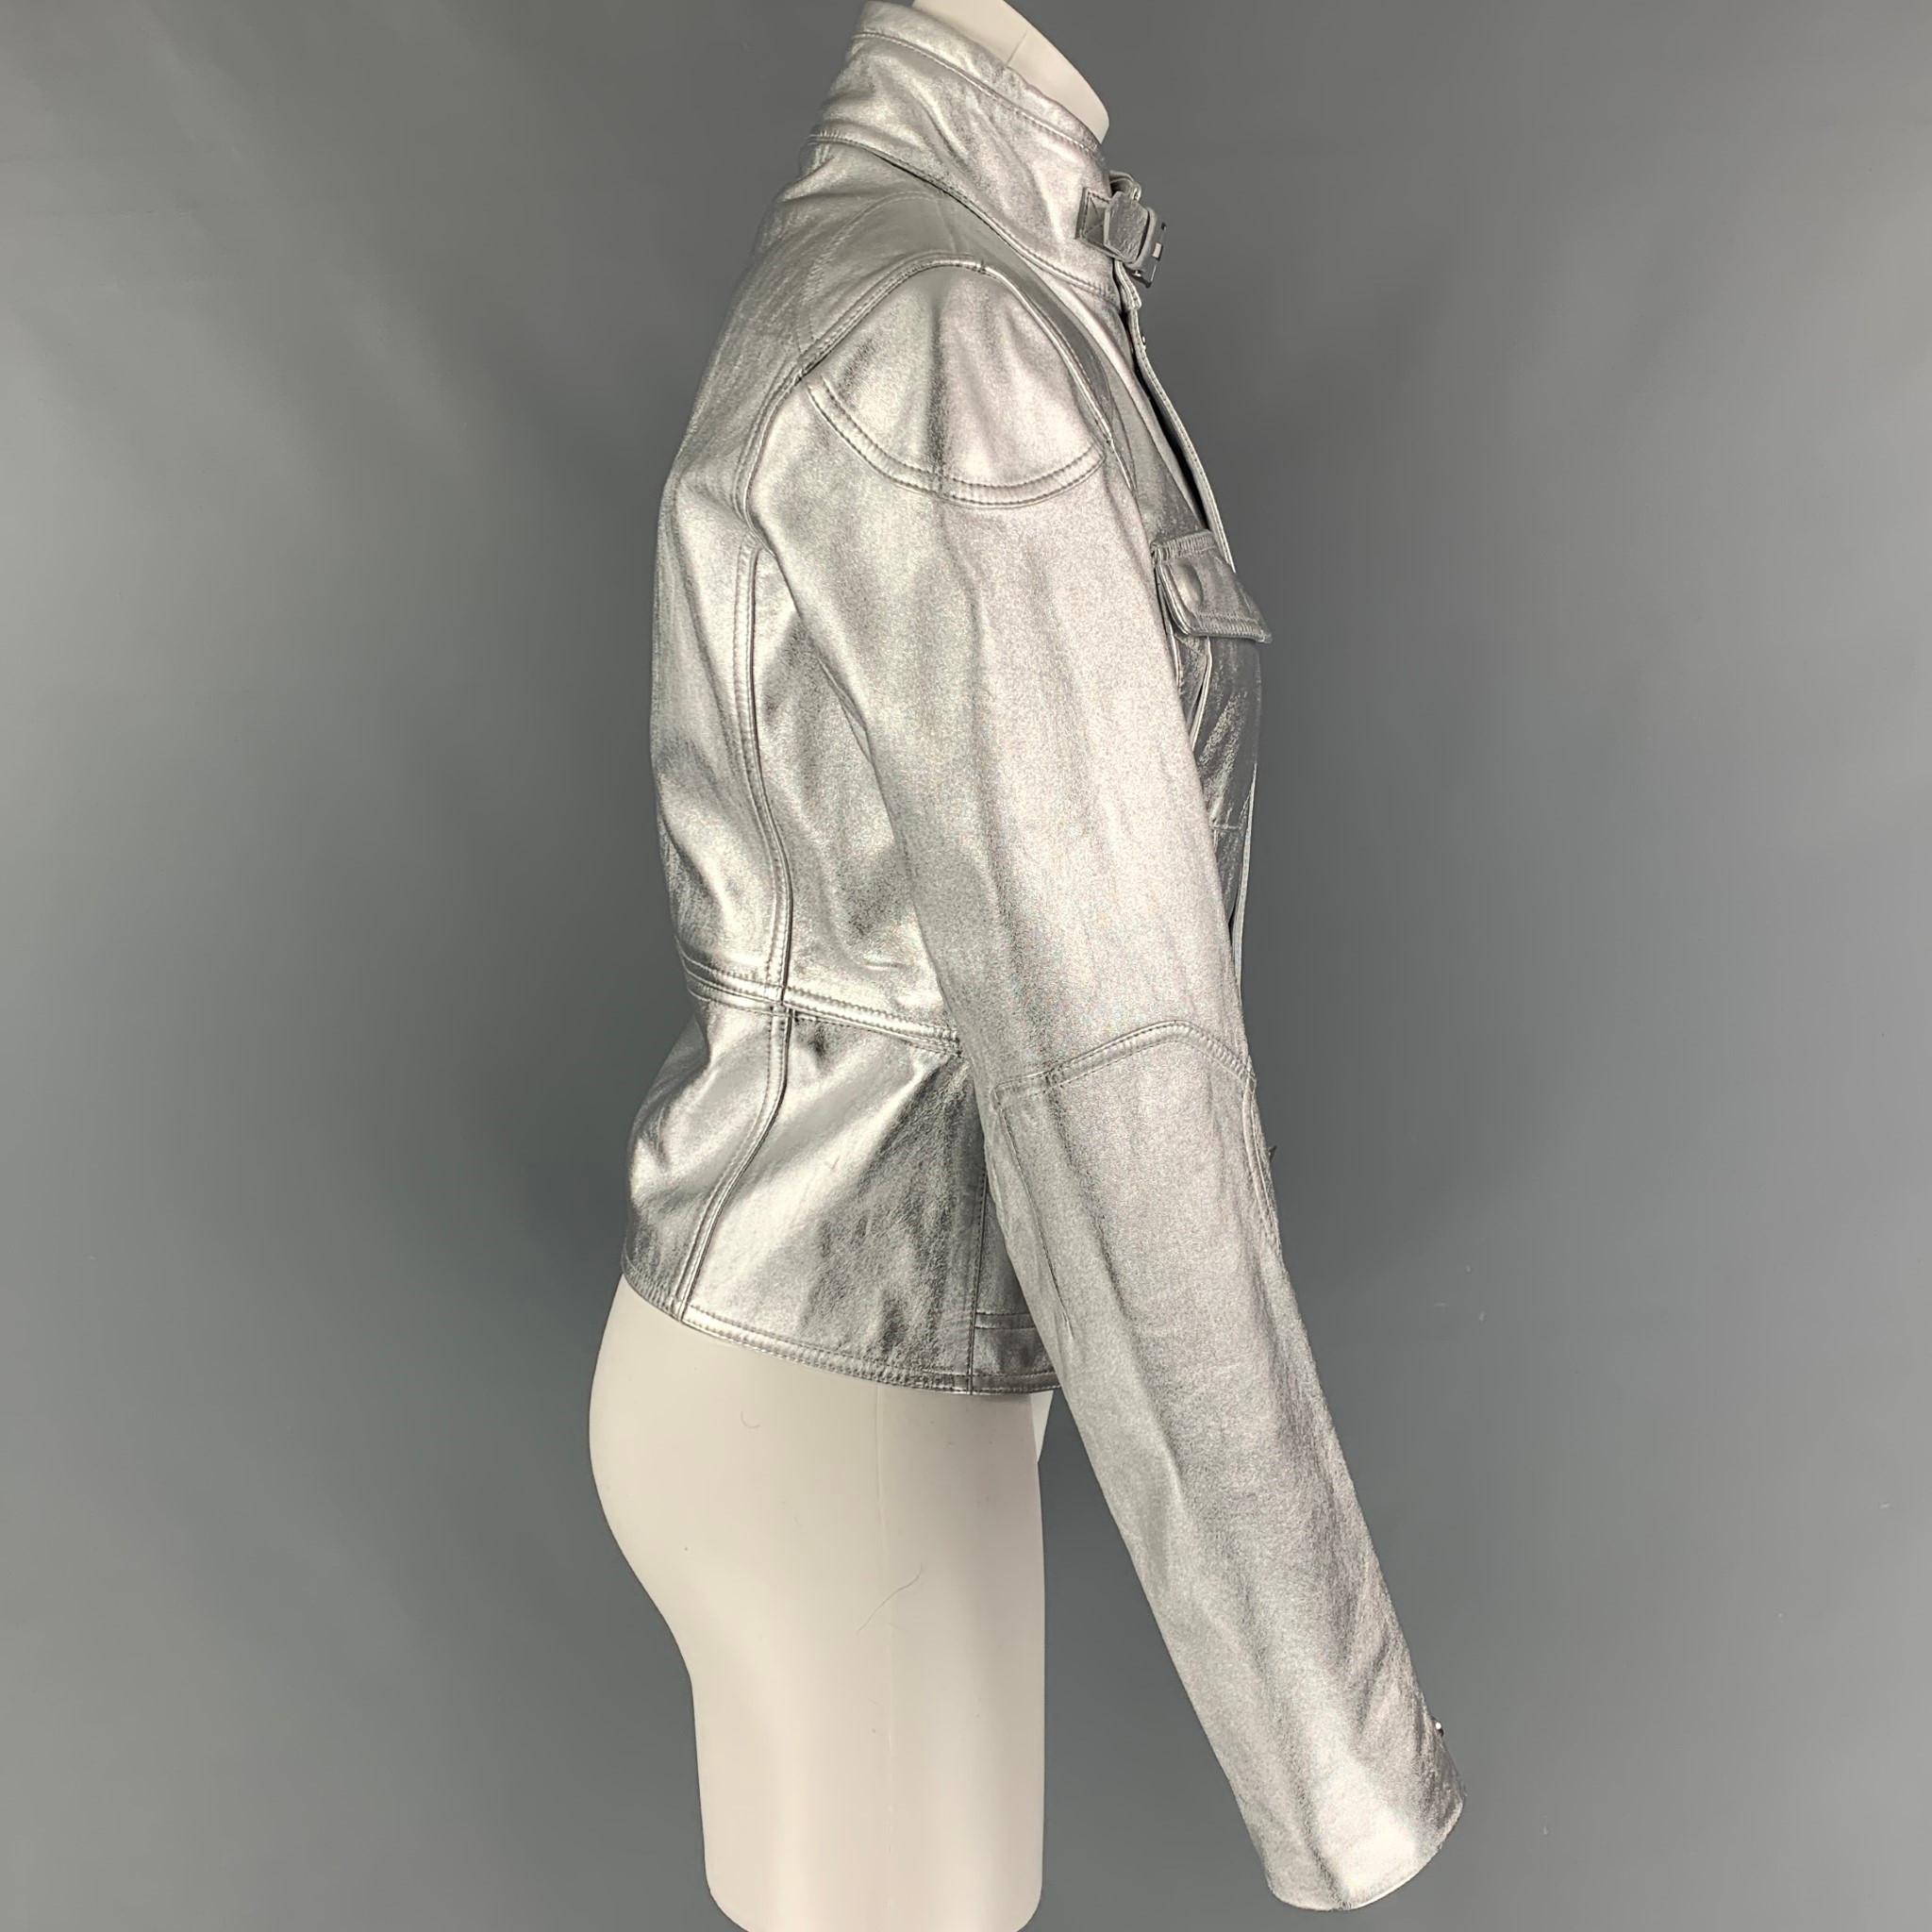 RALPH LAUREN 'Black Label' jacket comes in a silver metallic leather featuring a detachable panel, front pockets, collar strap, strap details, and a hidden zip & snap button closure. Made in Italy. 

Excellent Pre-Owned Condition.
Marked: